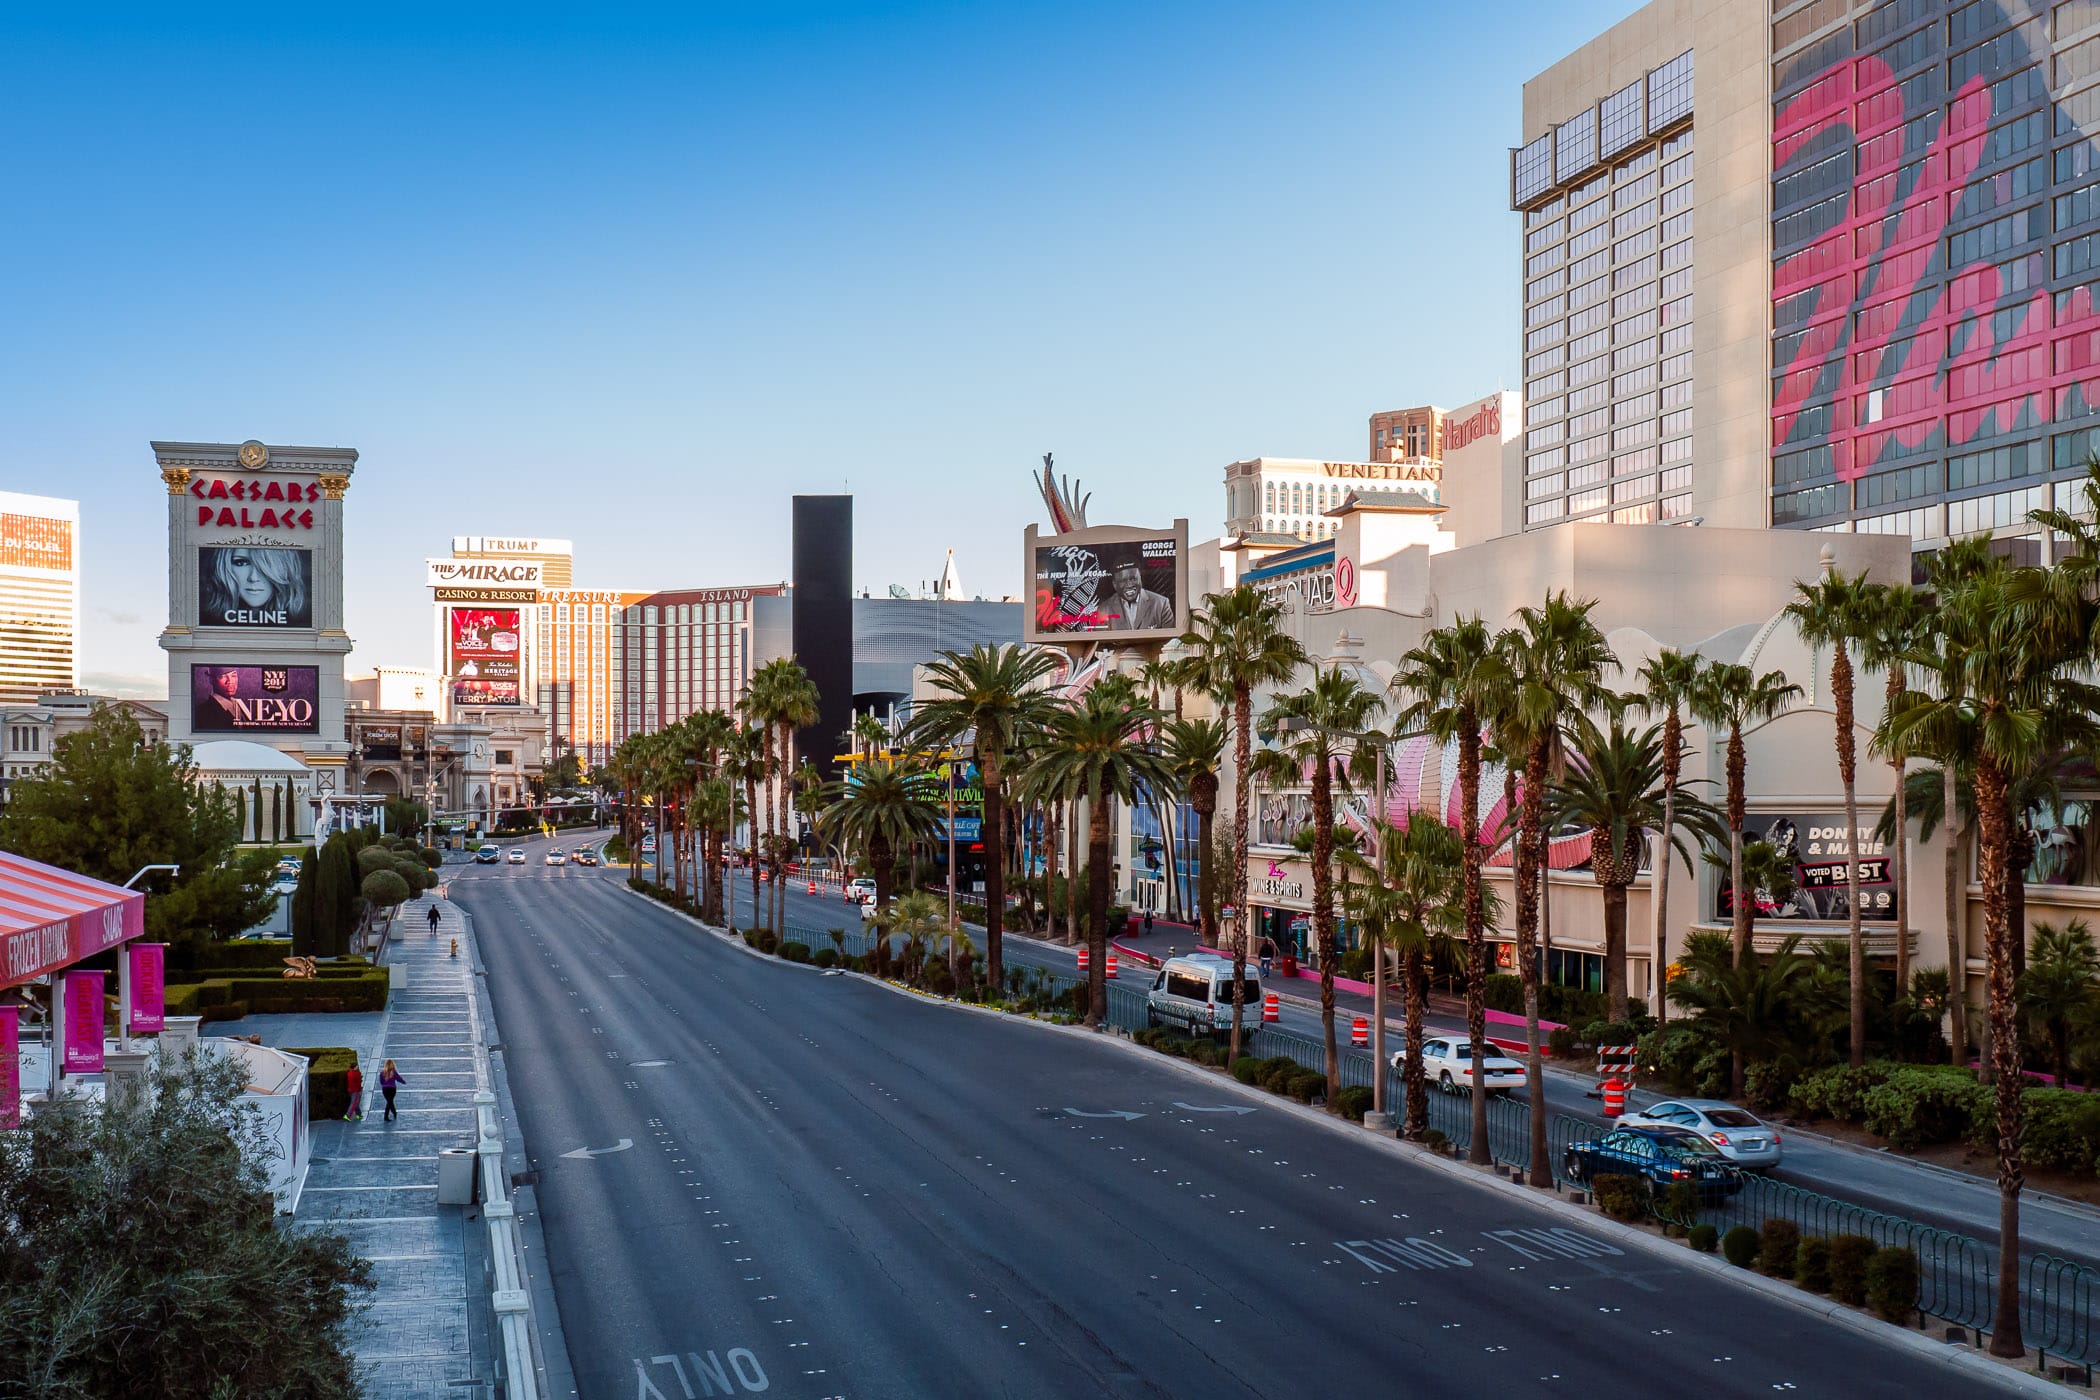 The Strip begins to come to life as the sun rises on Las Vegas.